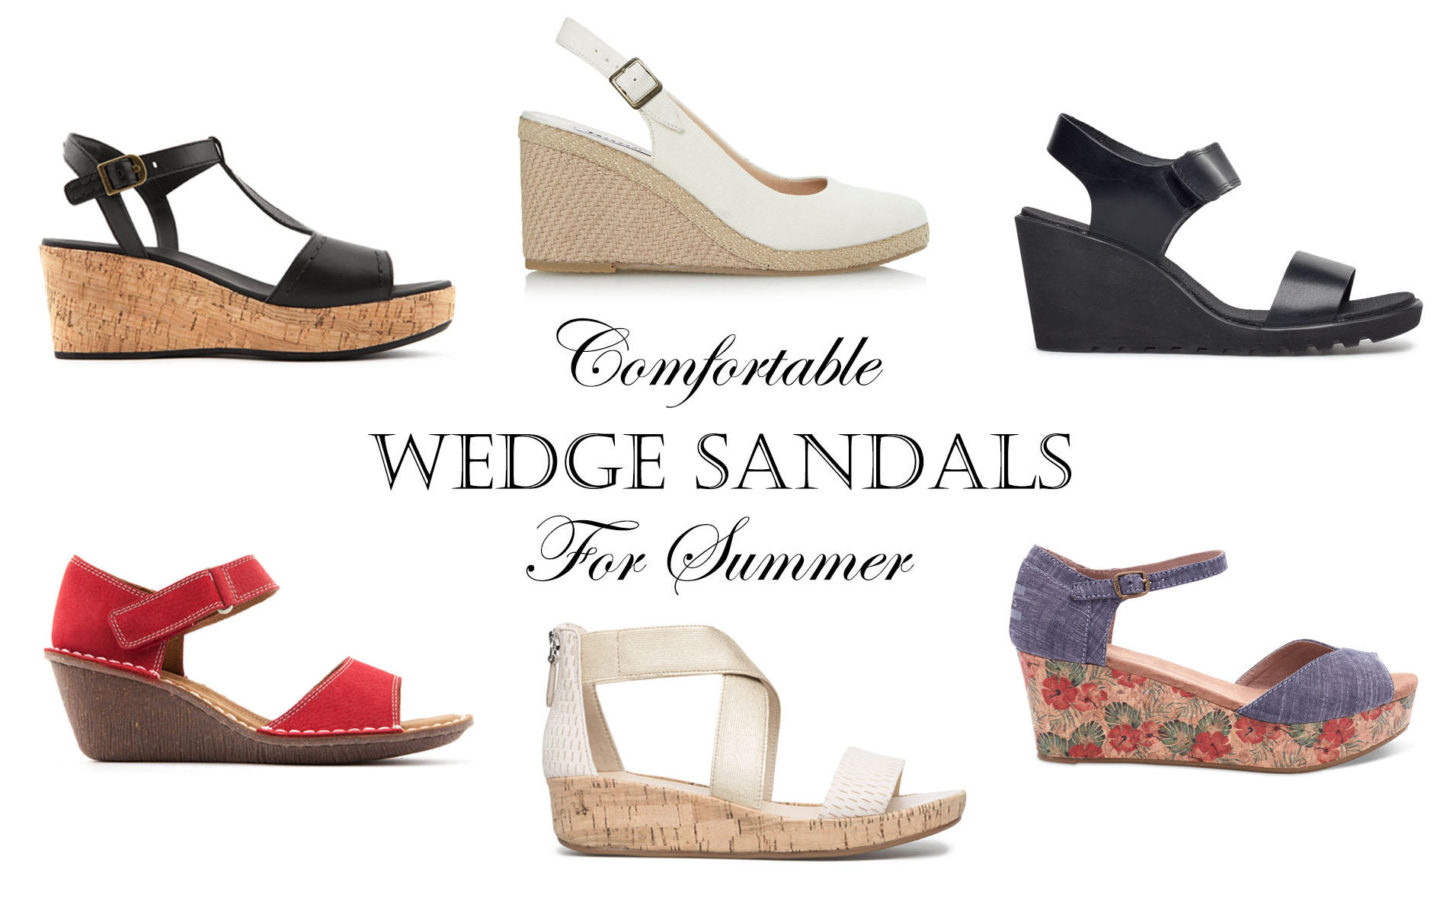 Comfortable Wedge Sandals for Summer